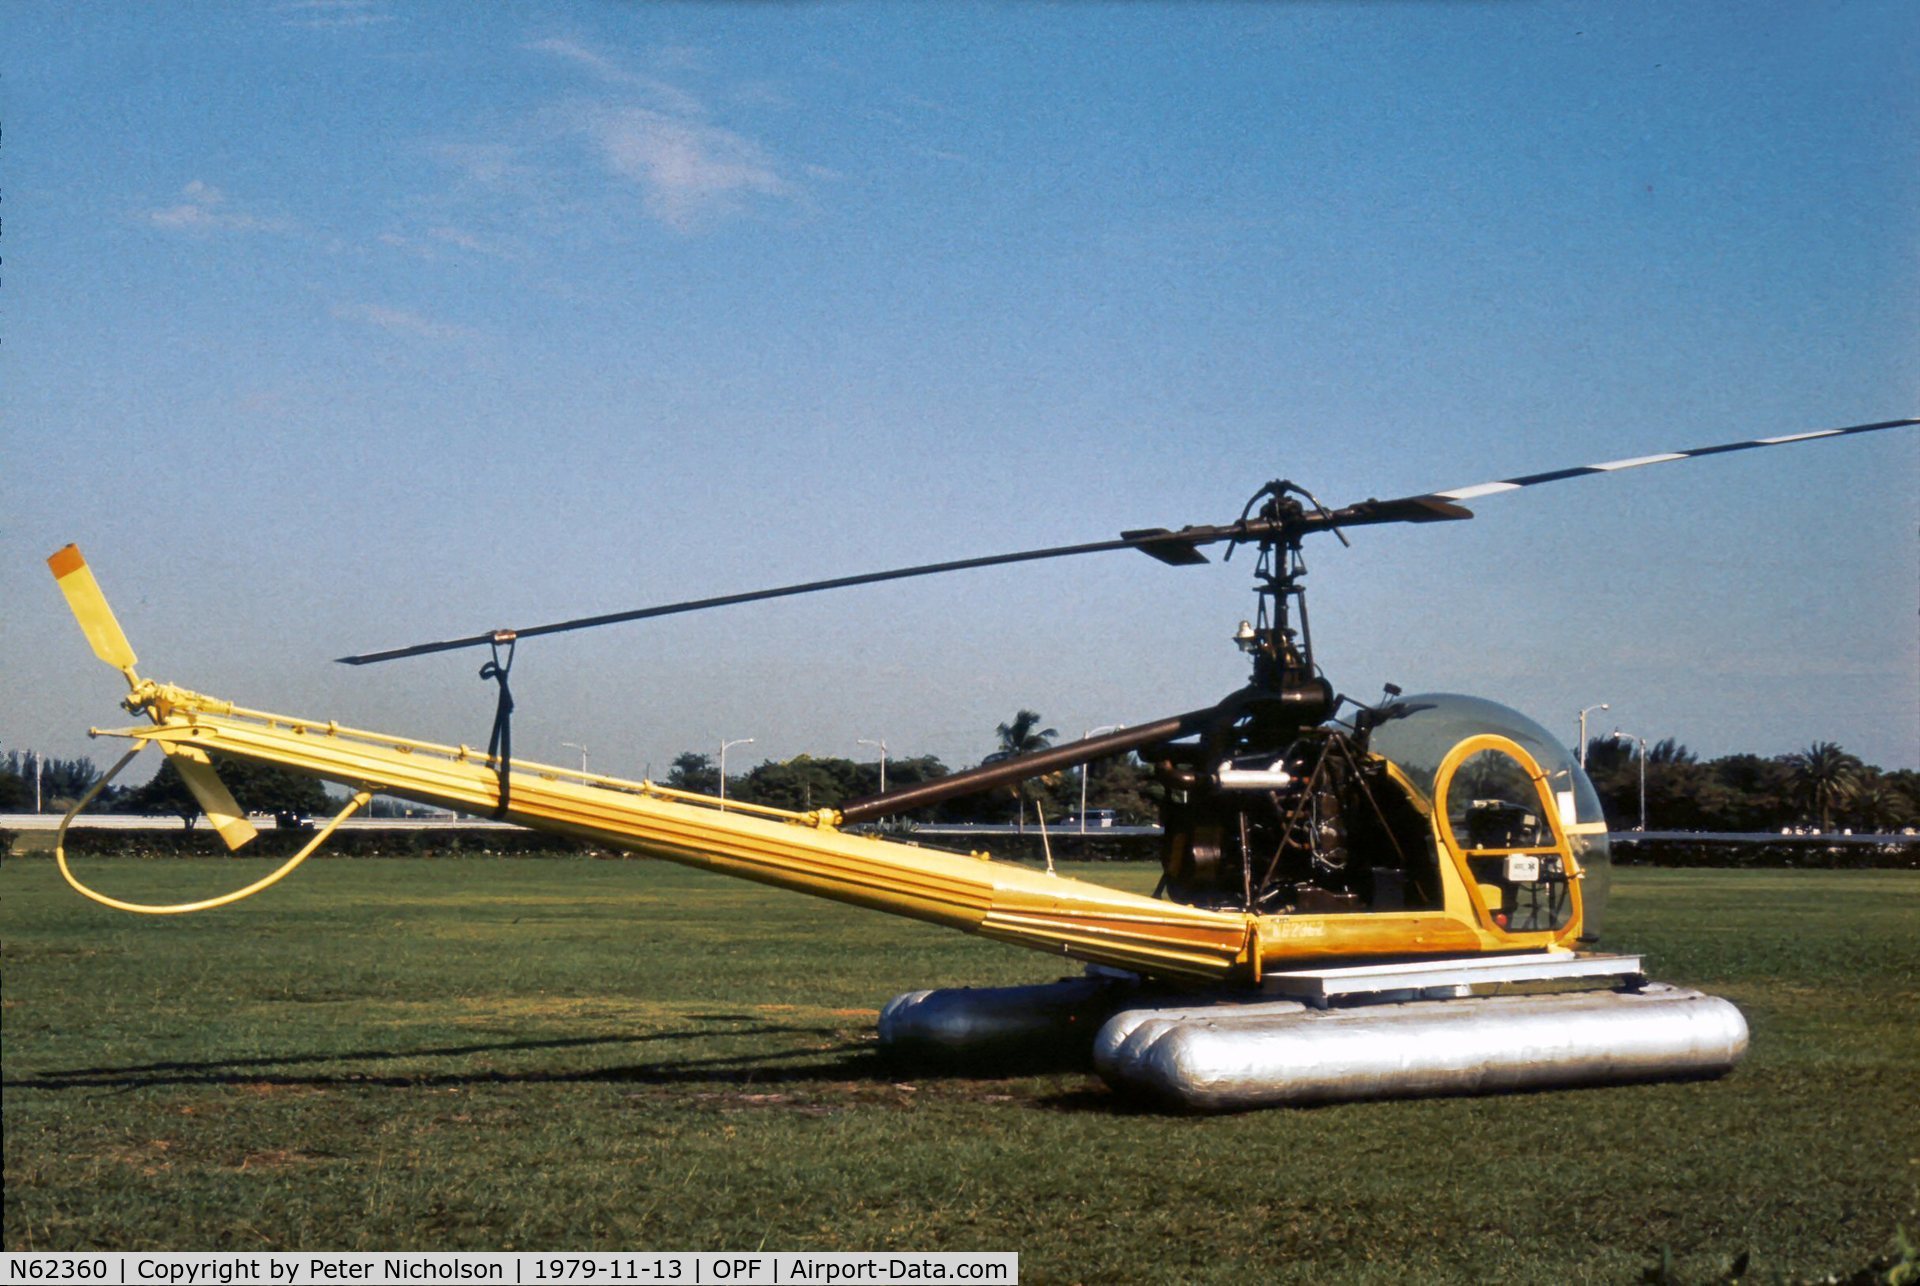 N62360, Hiller UH-12E C/N 1146, Ex OH-23D Raven 58-5497 was with Tropical Helicopters at Opa-Locka in 1979.